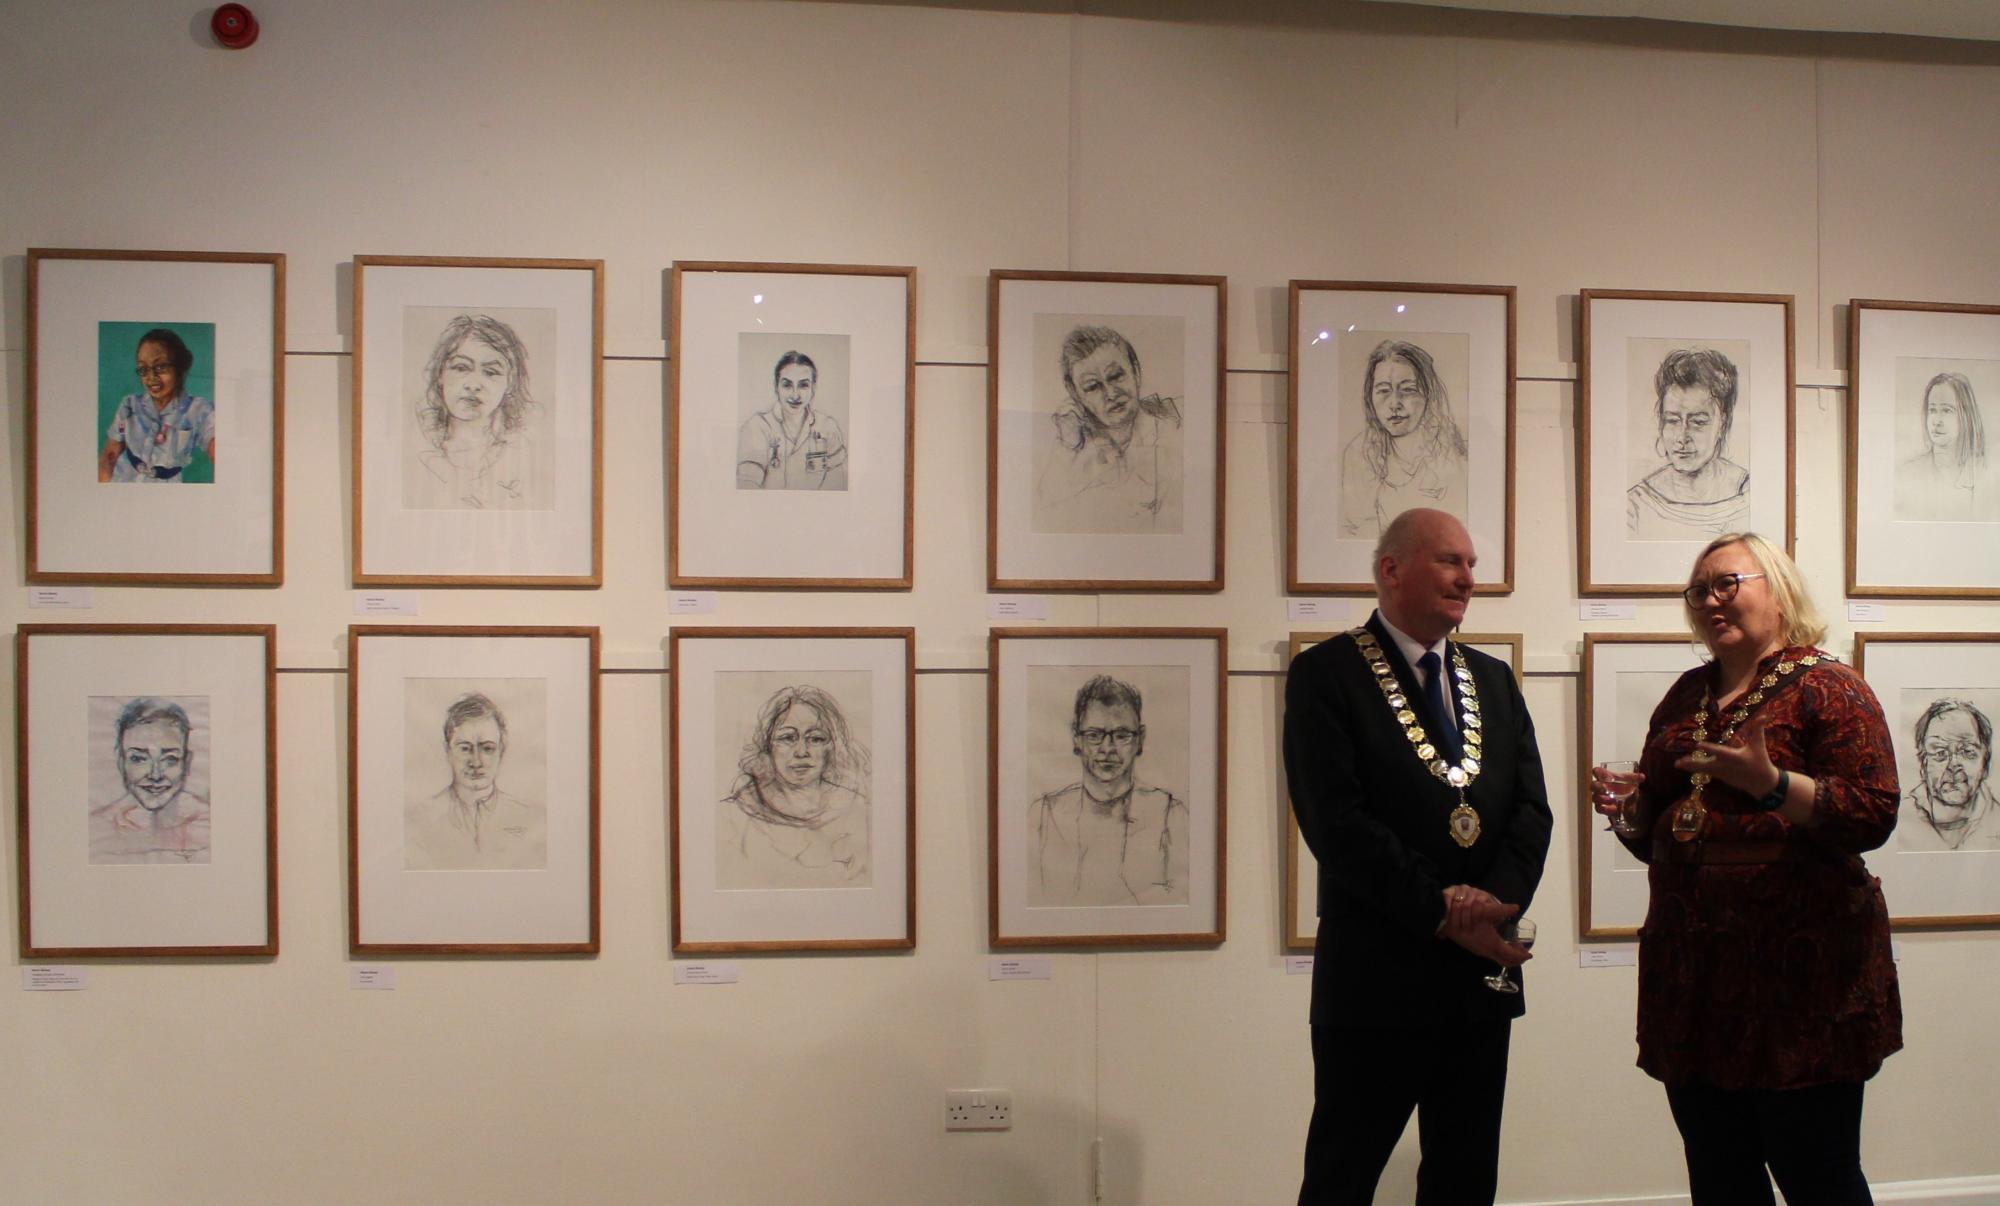 East Dunbartonshire Provost Gillian Renwick and Clackmannanshire Provost Donald Balsillie are pictured in front of paintings at the exhibition